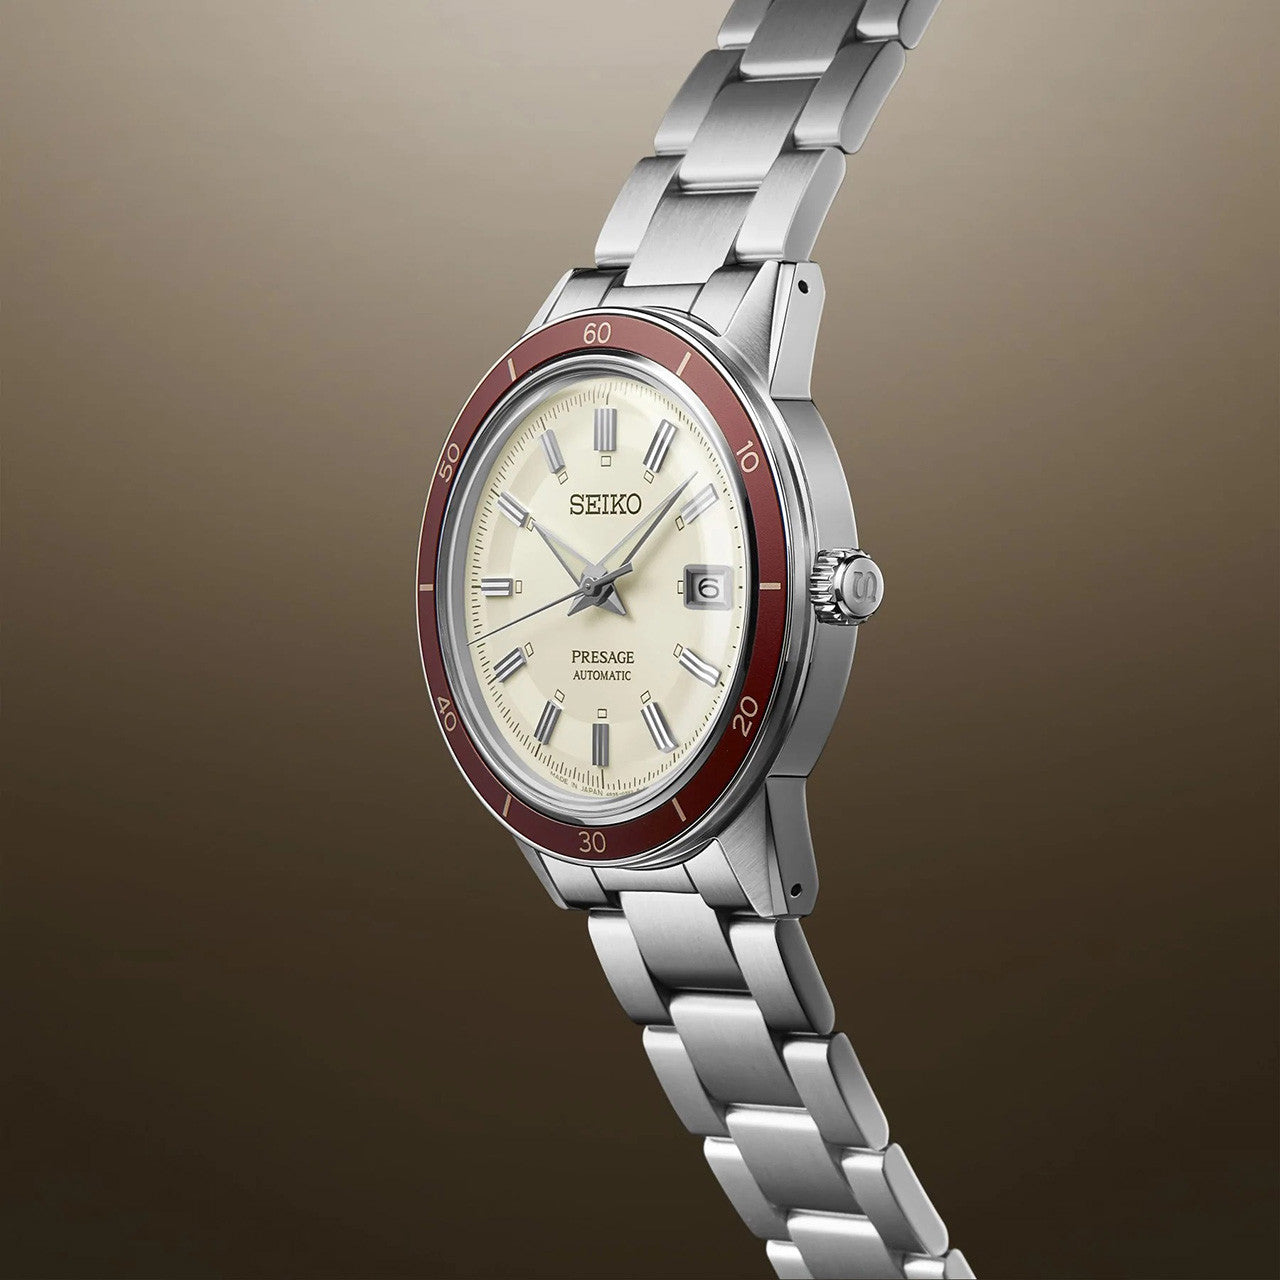 Seiko Style 60's. SRPH93J Presage maroon watch with cream dial against plain background.